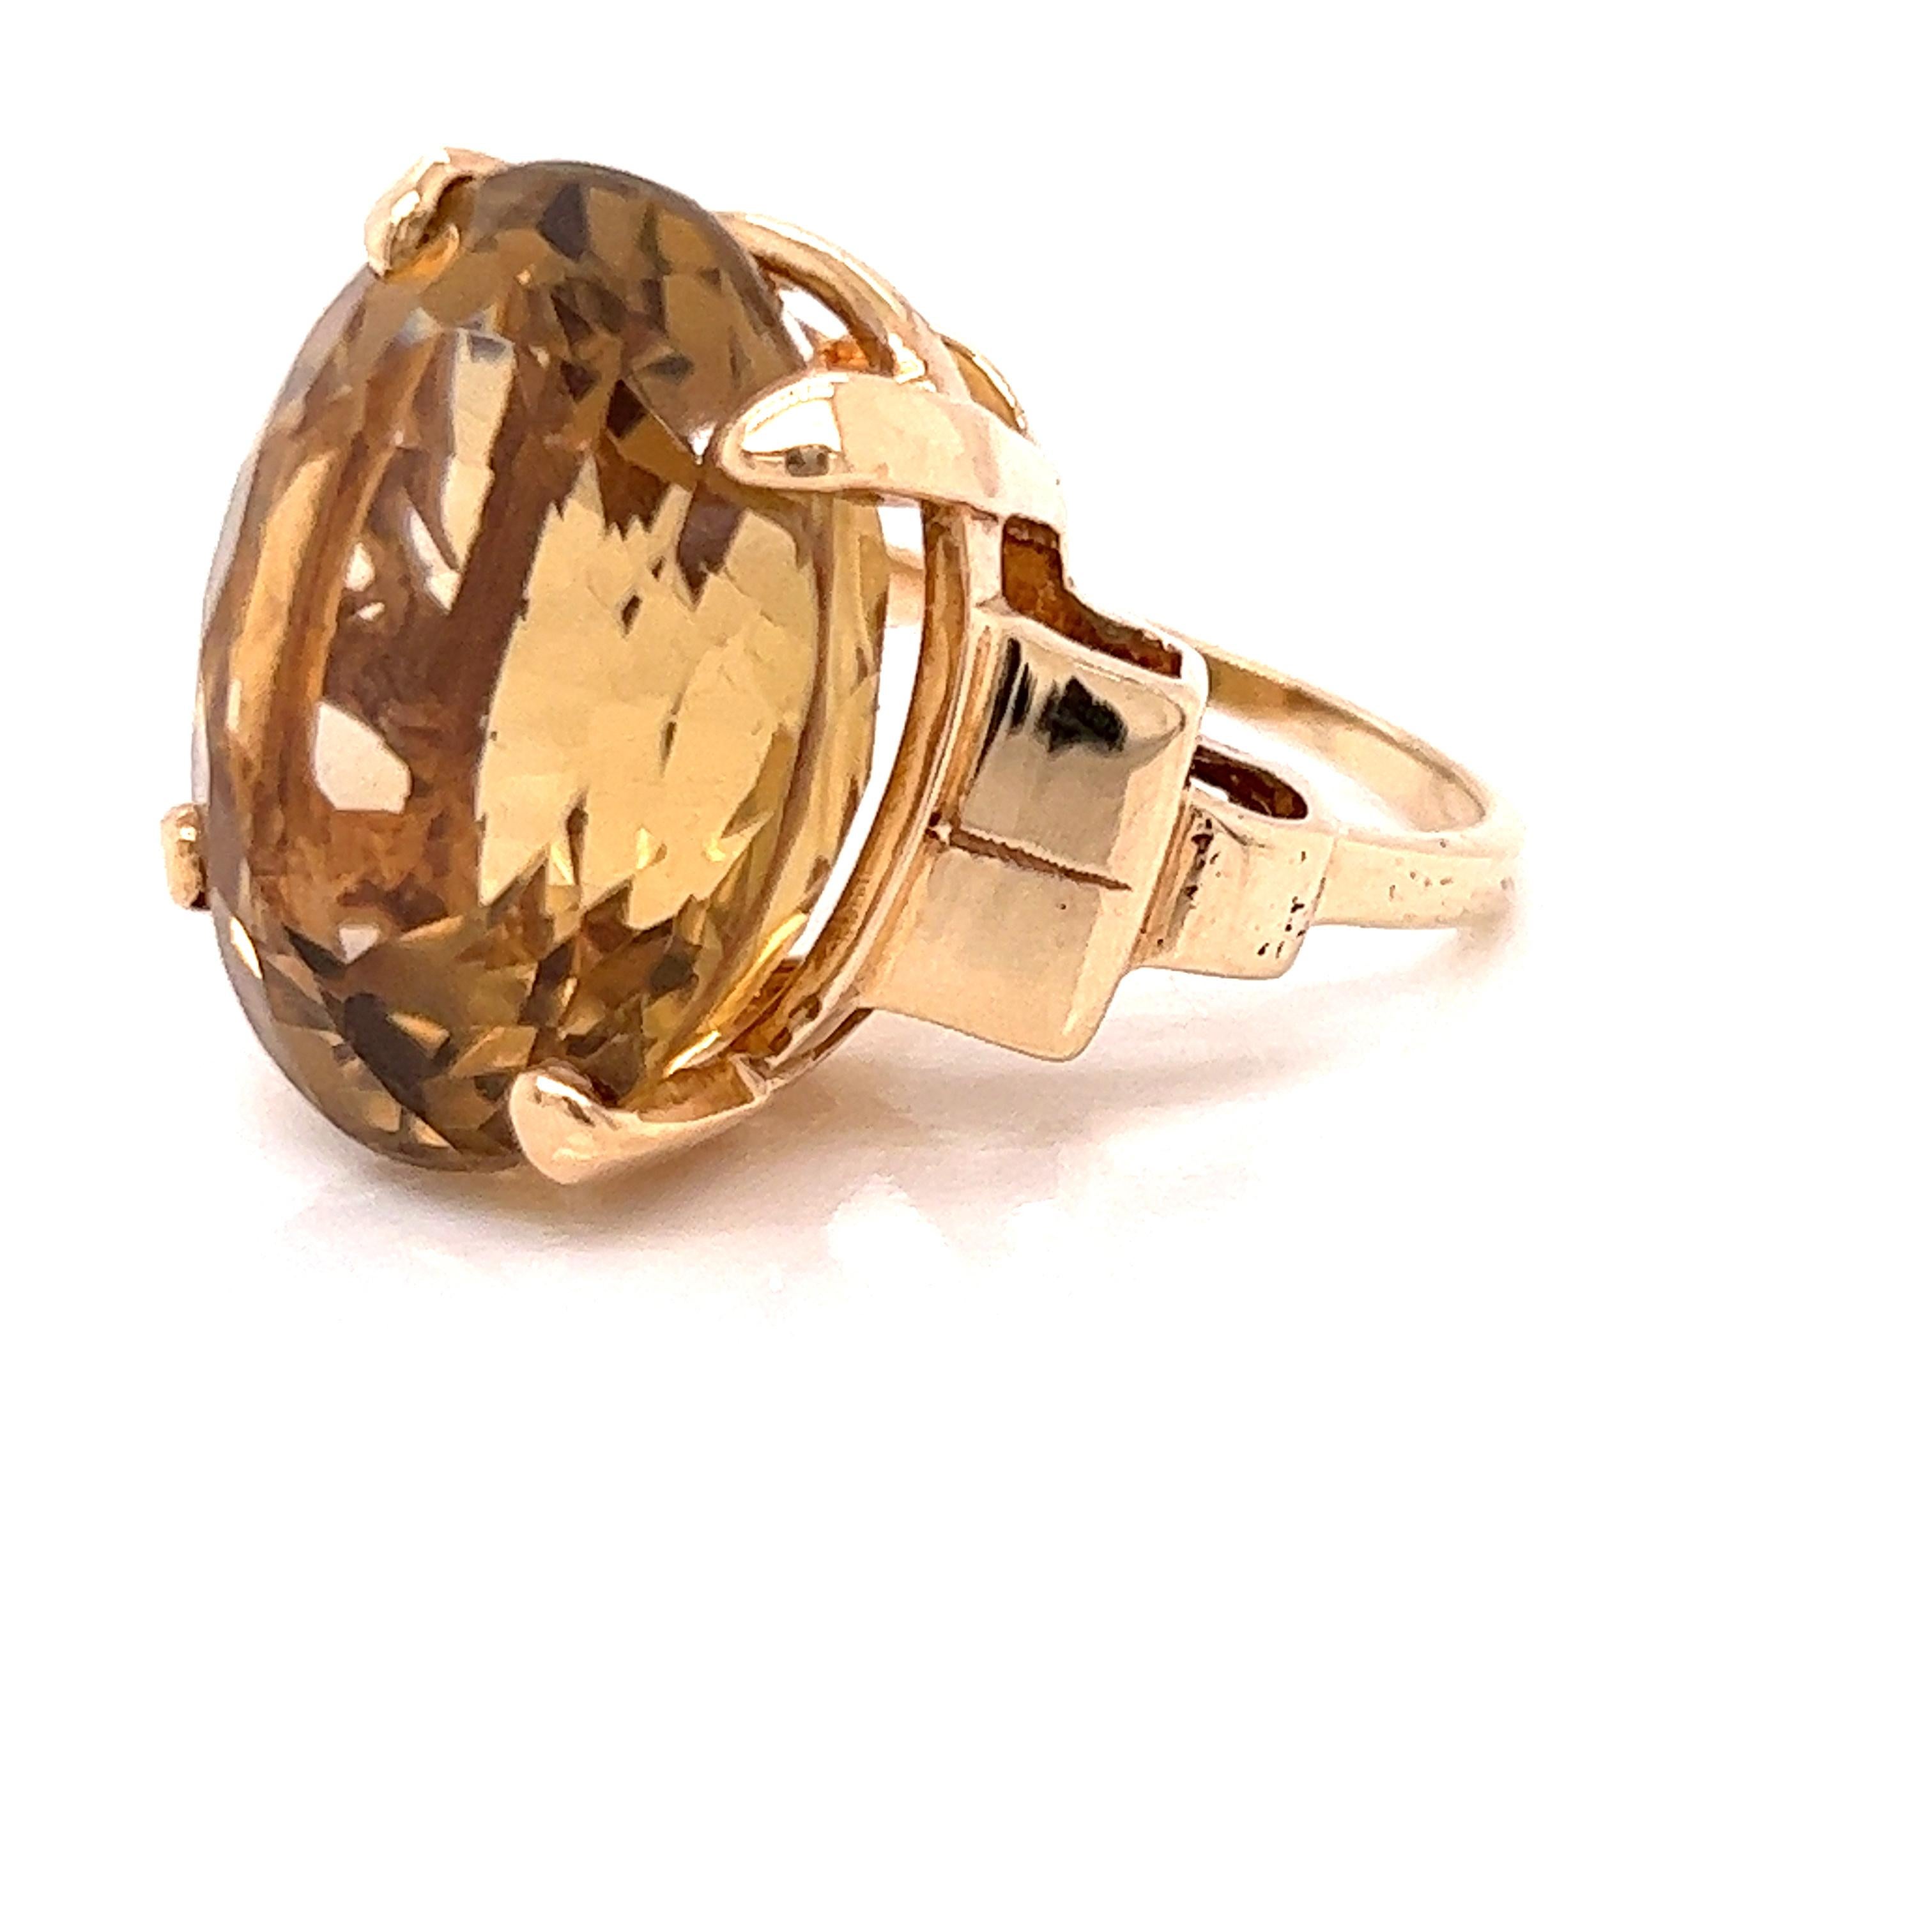 November Birthdays and statement ring fans will enjoy this vintage 17.09 carat oval citrine ring.  Set in five grams of 14K yellow gold, this is a substantial piece of jewelry.  This is a US size 6.25 and can be sized.
This ring is estate in very